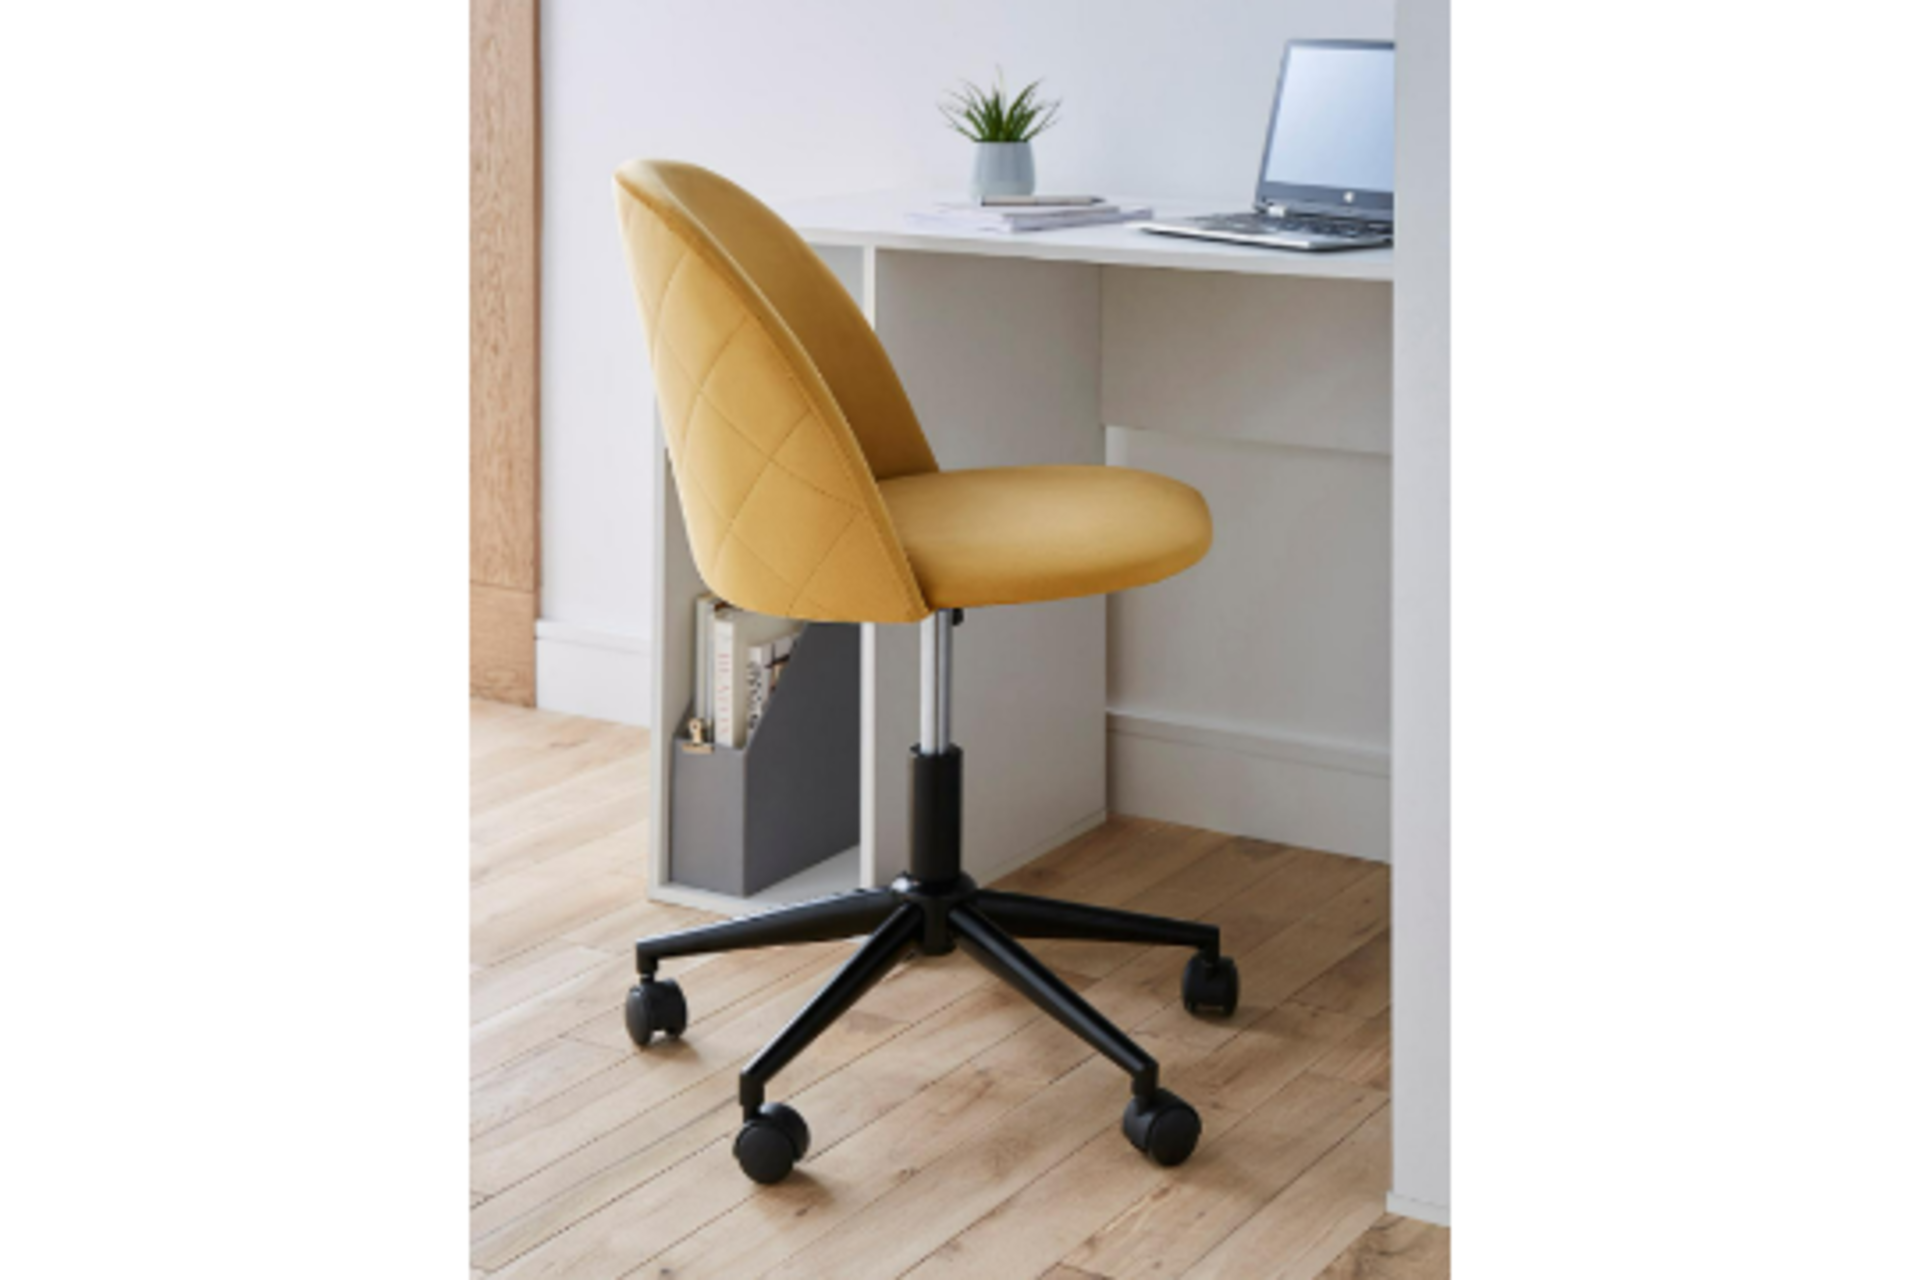 NEW & BOXED Klara Office Chair - OCHRE. RRP £119 EACH. The Klara Office Chair is a luxurious and